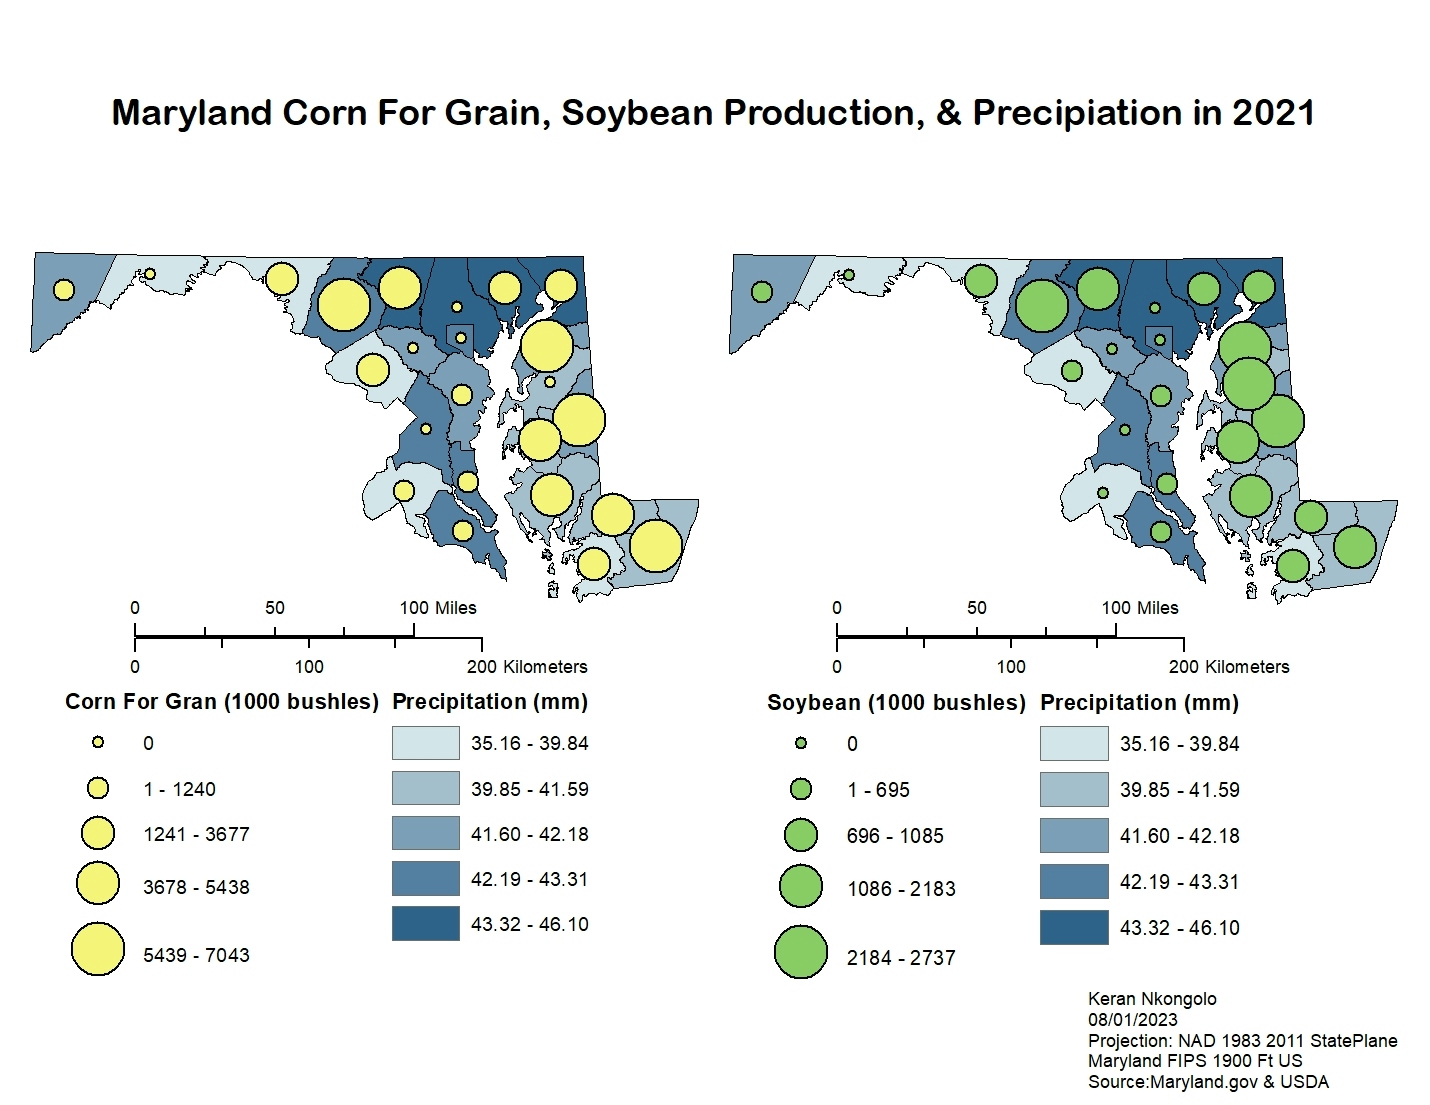 Maryland Soybean and Corn